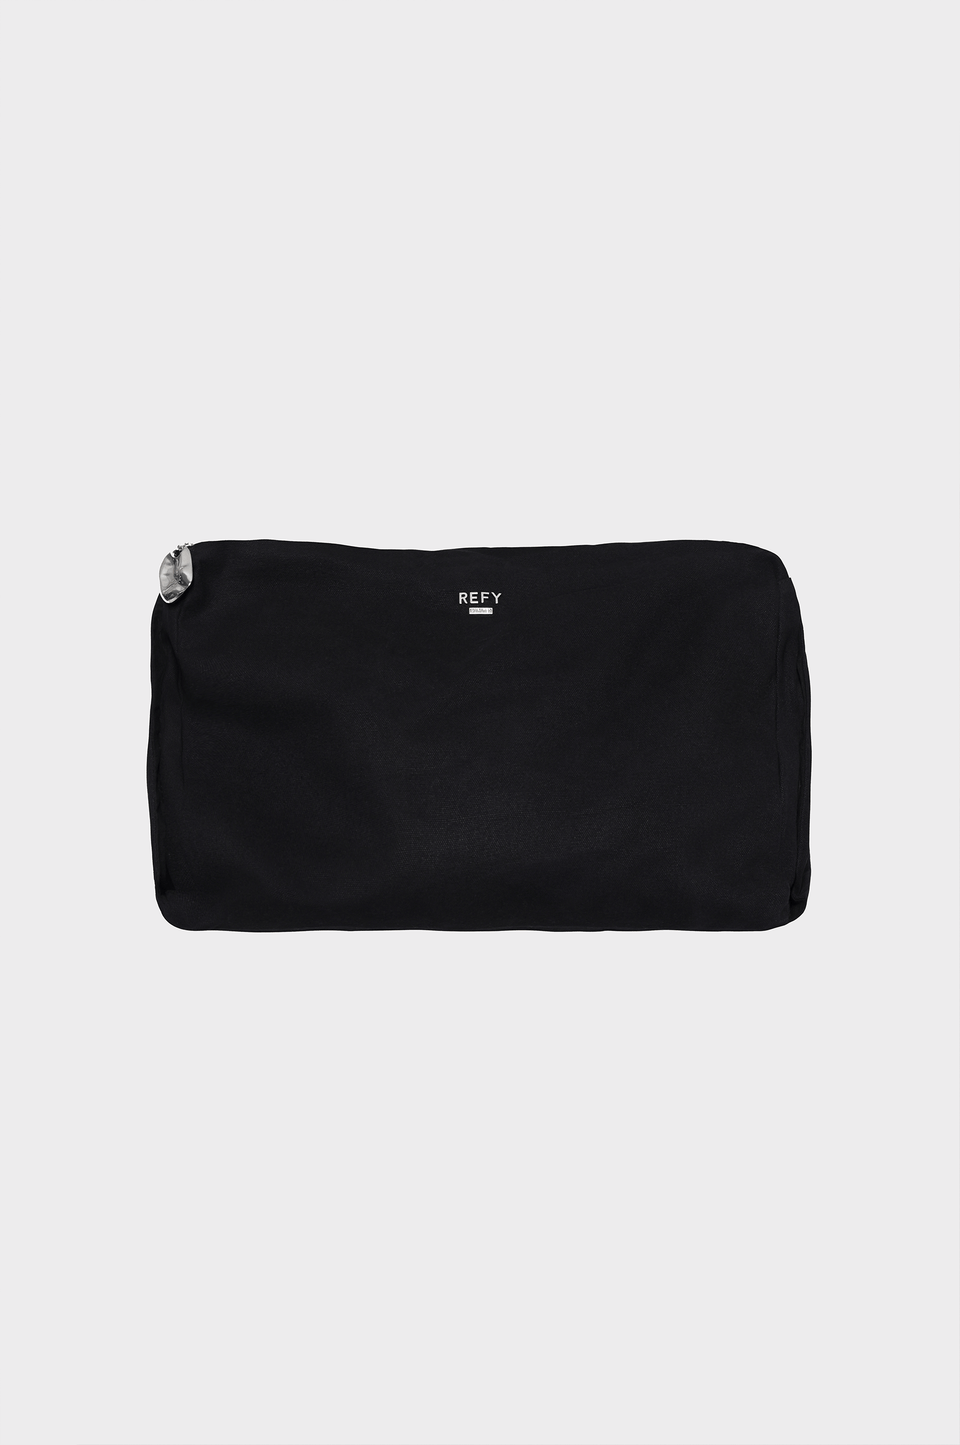 CLOSE UP IMAGE OF REFY OVERSIZED POUCH IN BLACK